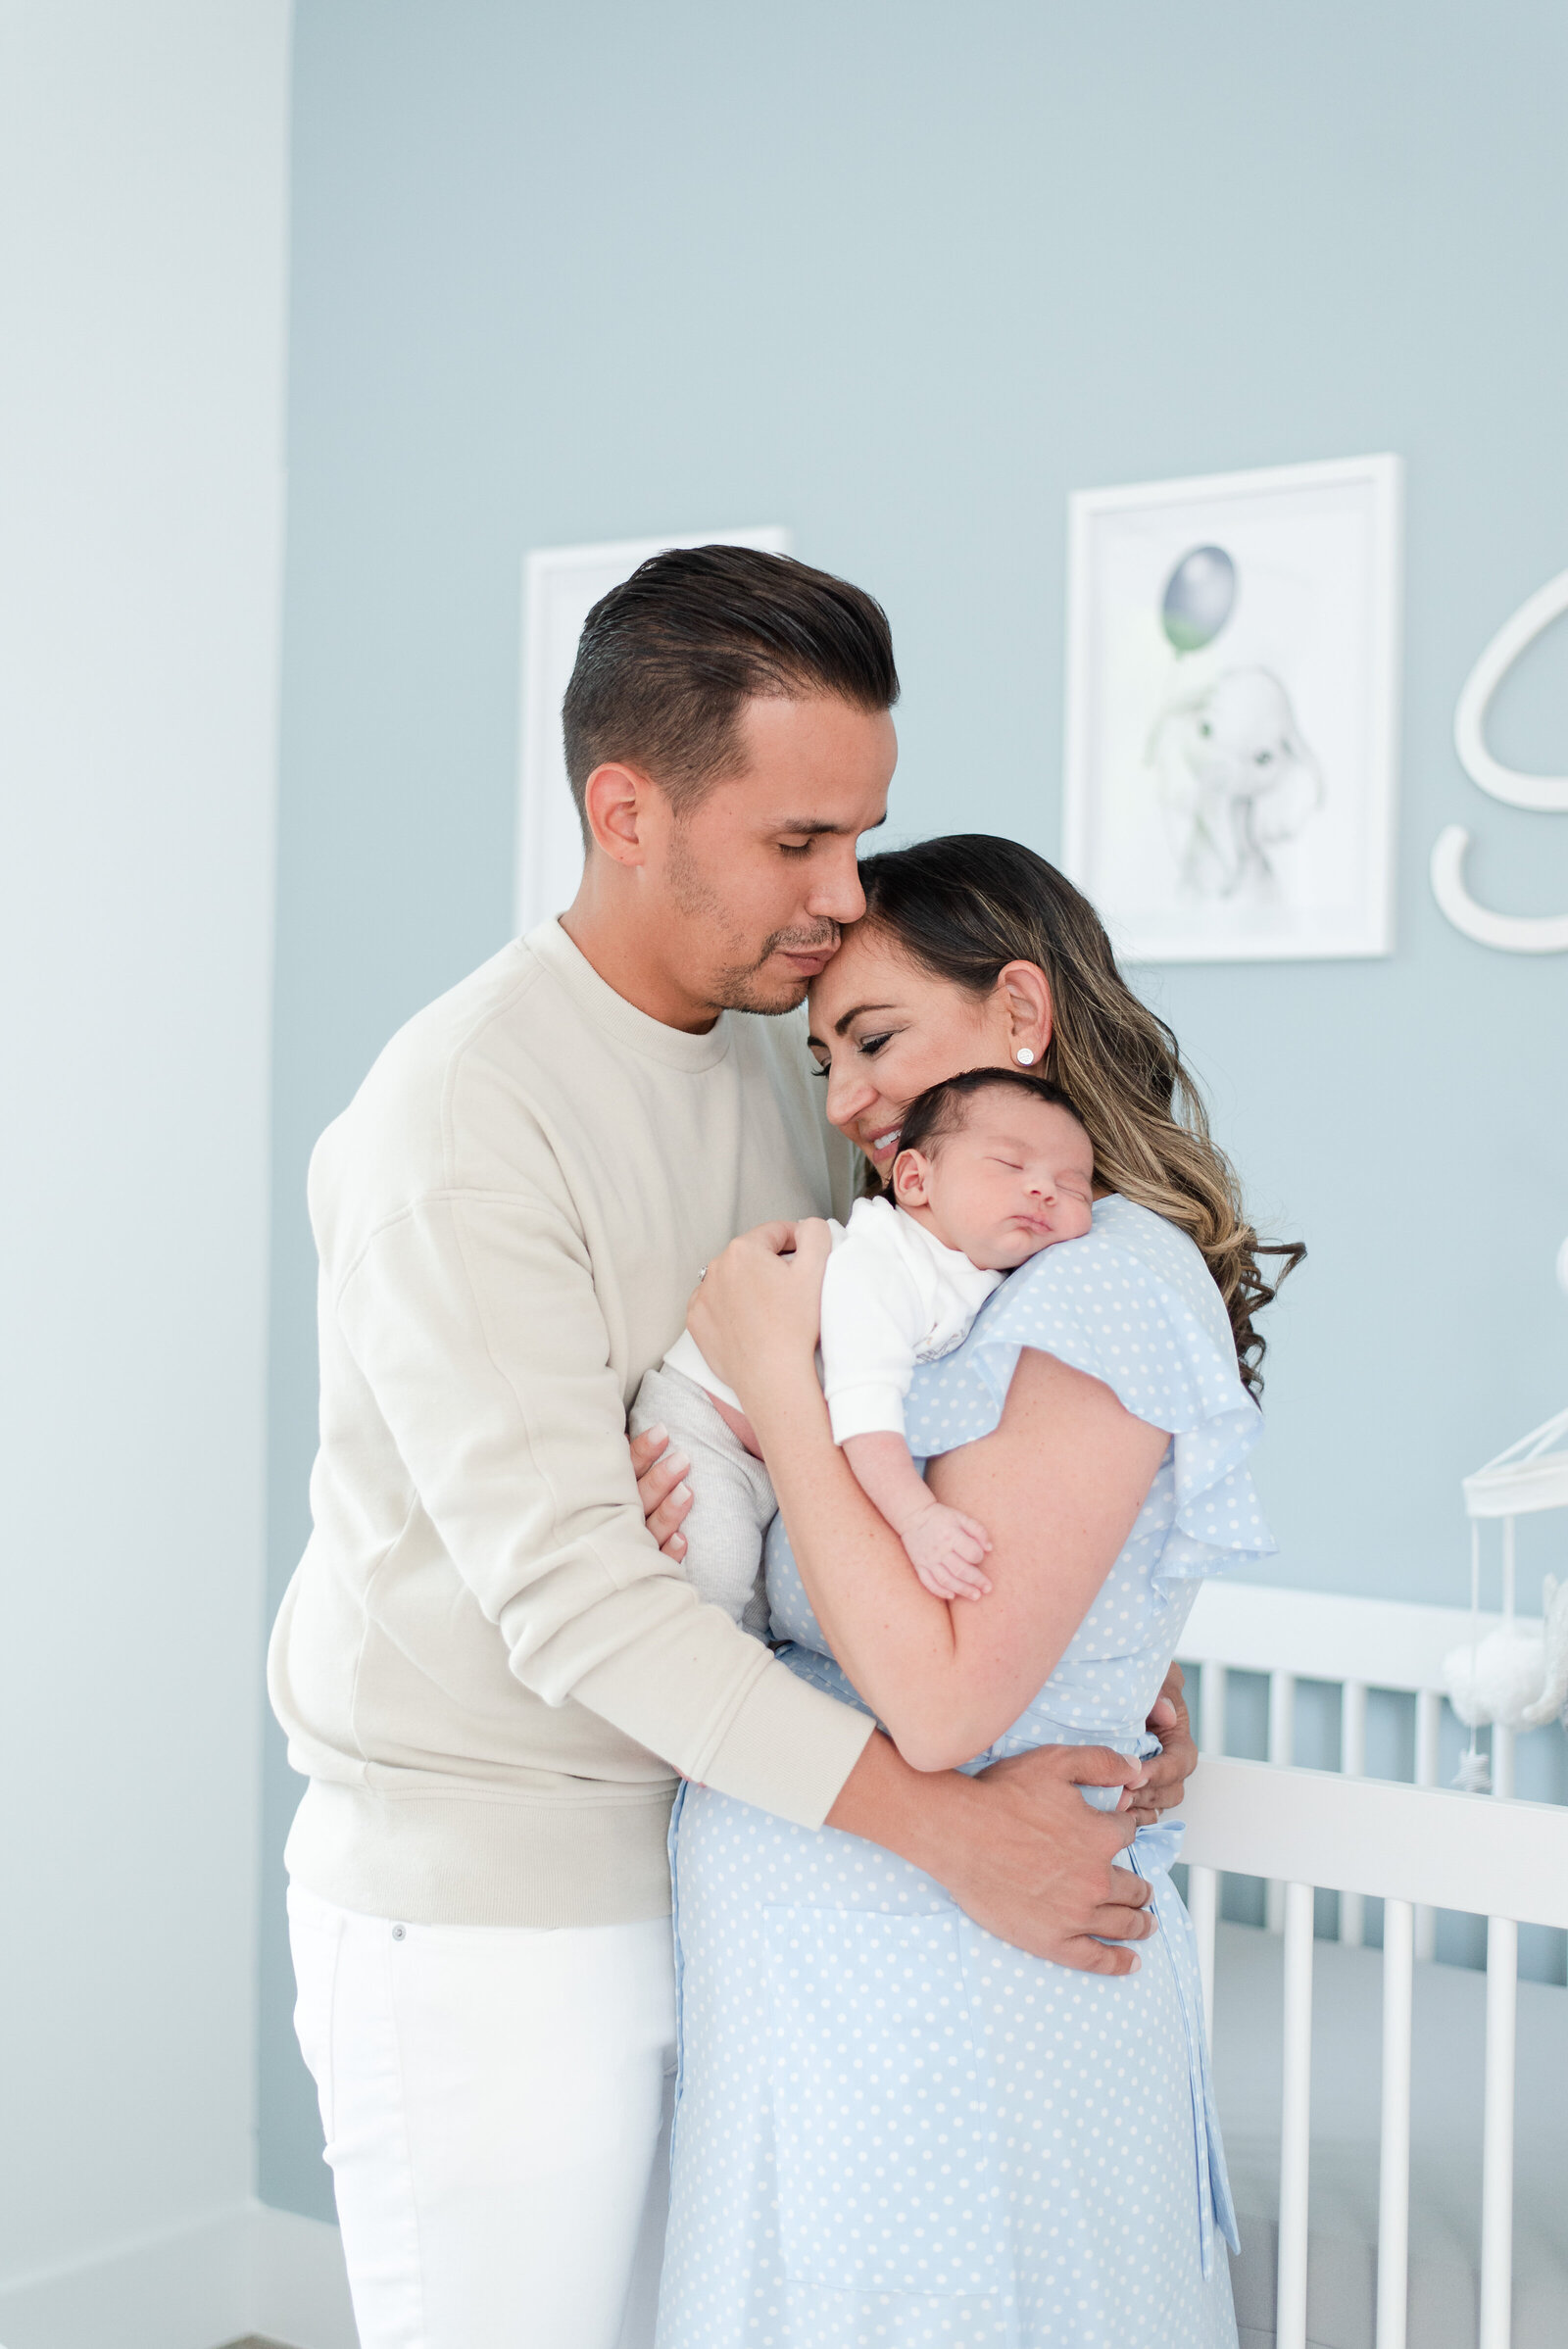 mom dad and newborn baby boy session in blue animal themed nursery in doral fl by Miami Lifestyle Photographers David and Meivys of MSP Photography